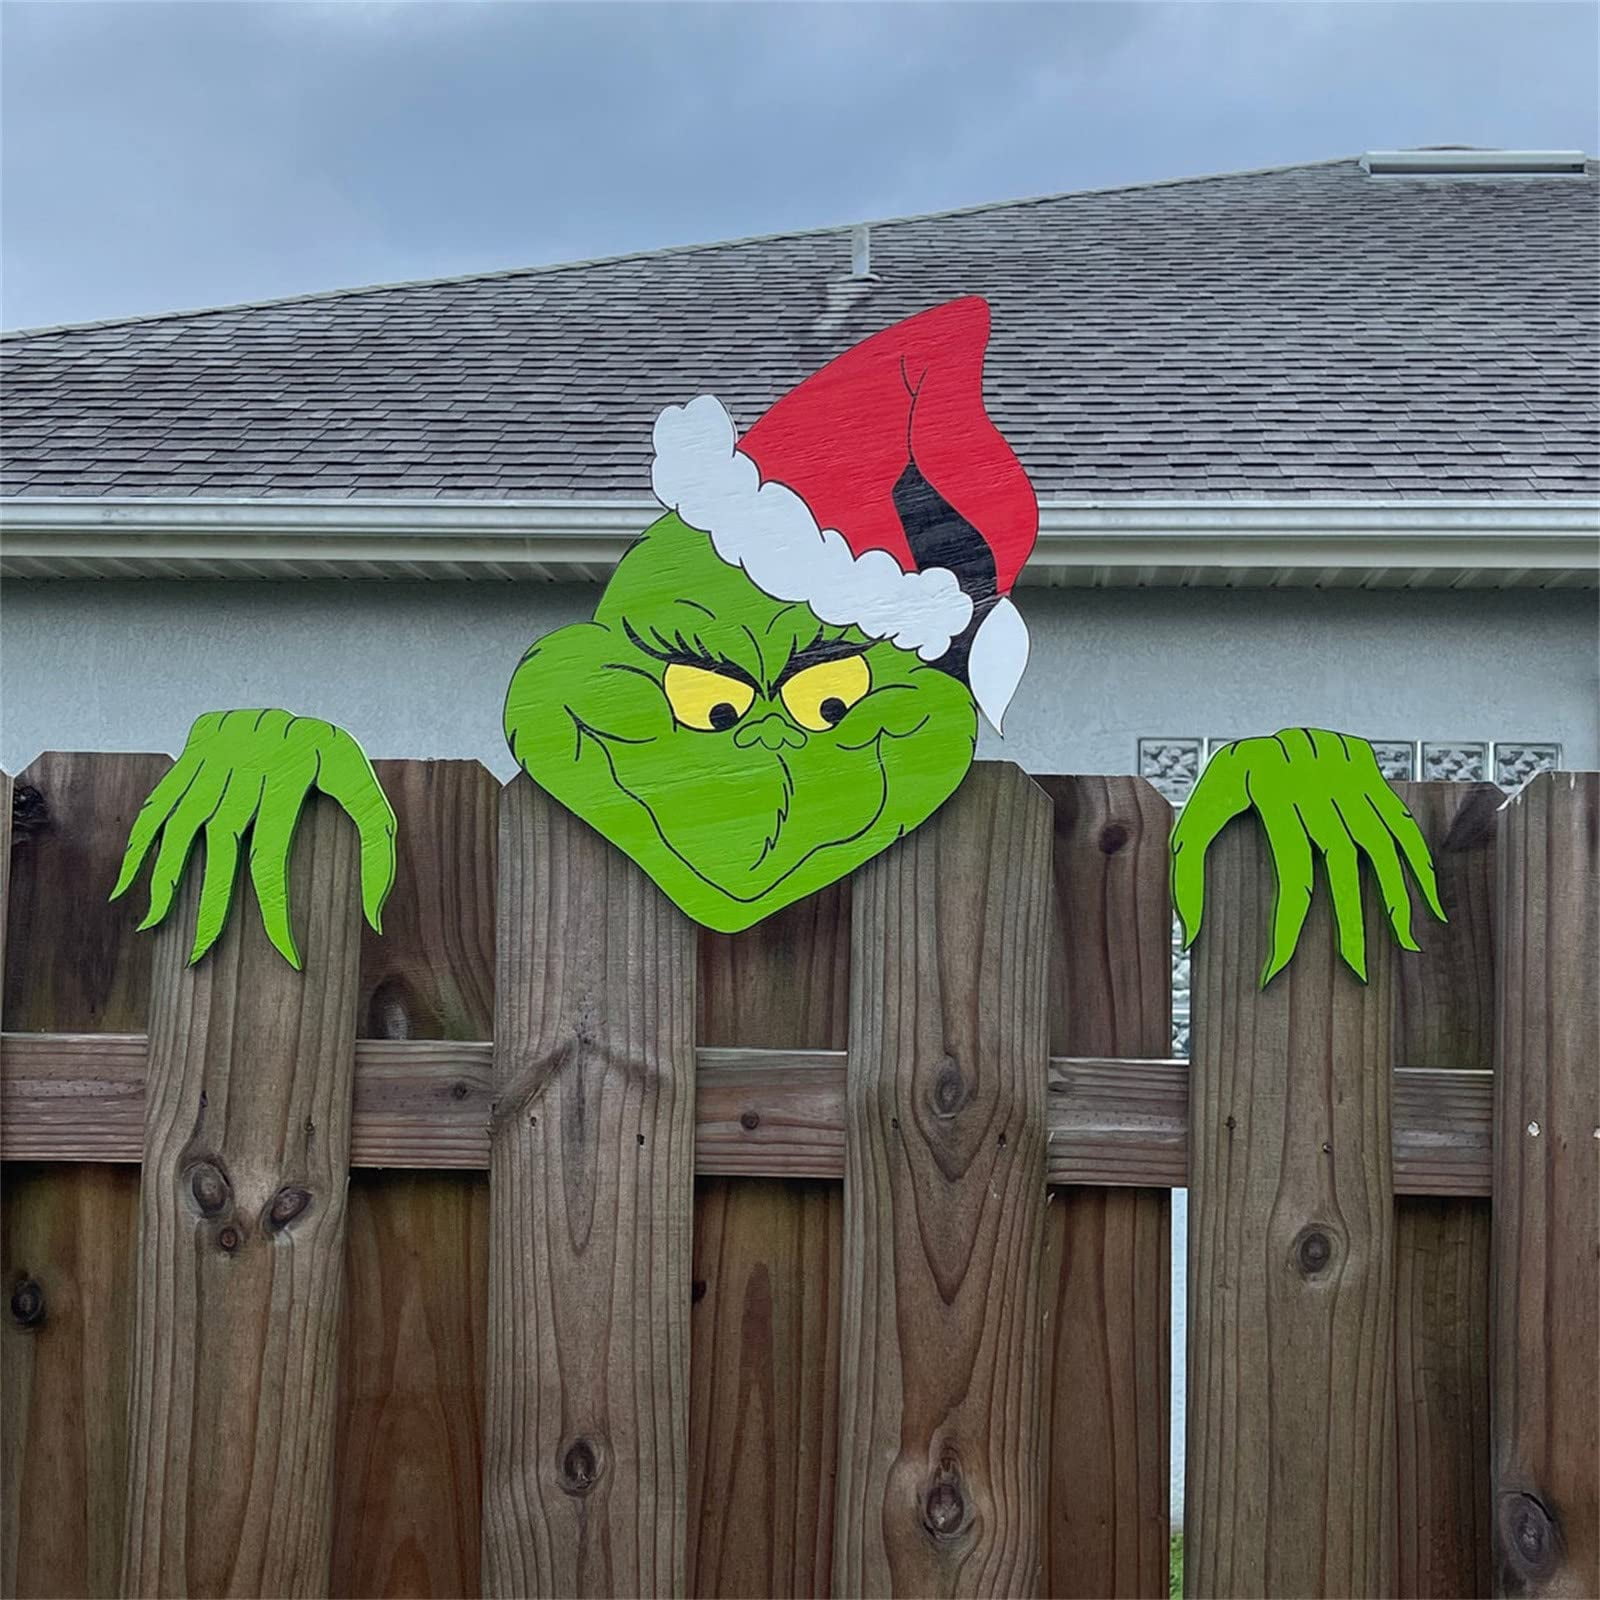 Christmas Fence Peeker Decorations, Grinch Peeking Garden Yard Decorations,  Grinch Peeping Xmas DIY Outdoor Garden Fence Sign Ornament for Home Patio  Holiday Decorations (Style C)z 